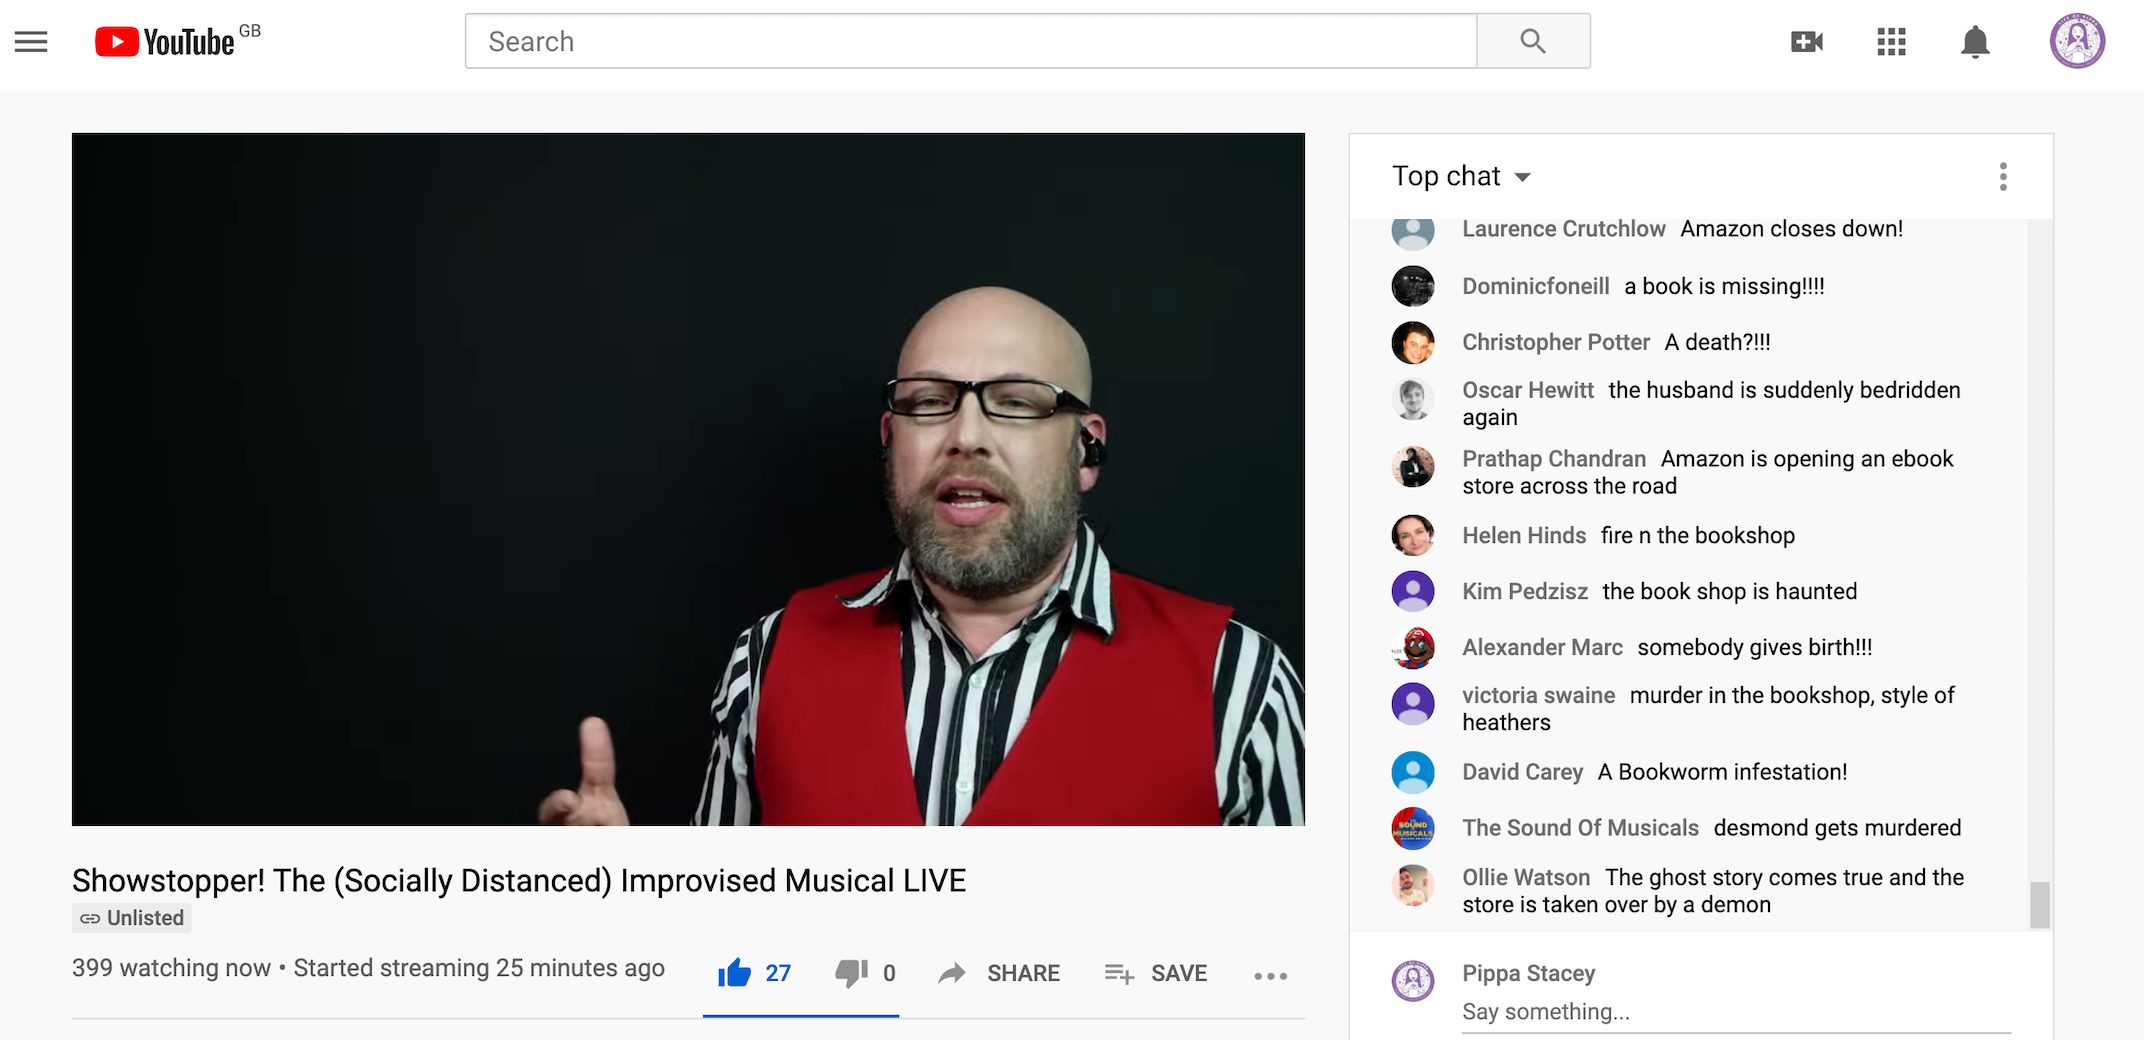 screenshot of showstopper livestream on youtube, showing one male performer and chat box of audience members making suggestions for what happens next